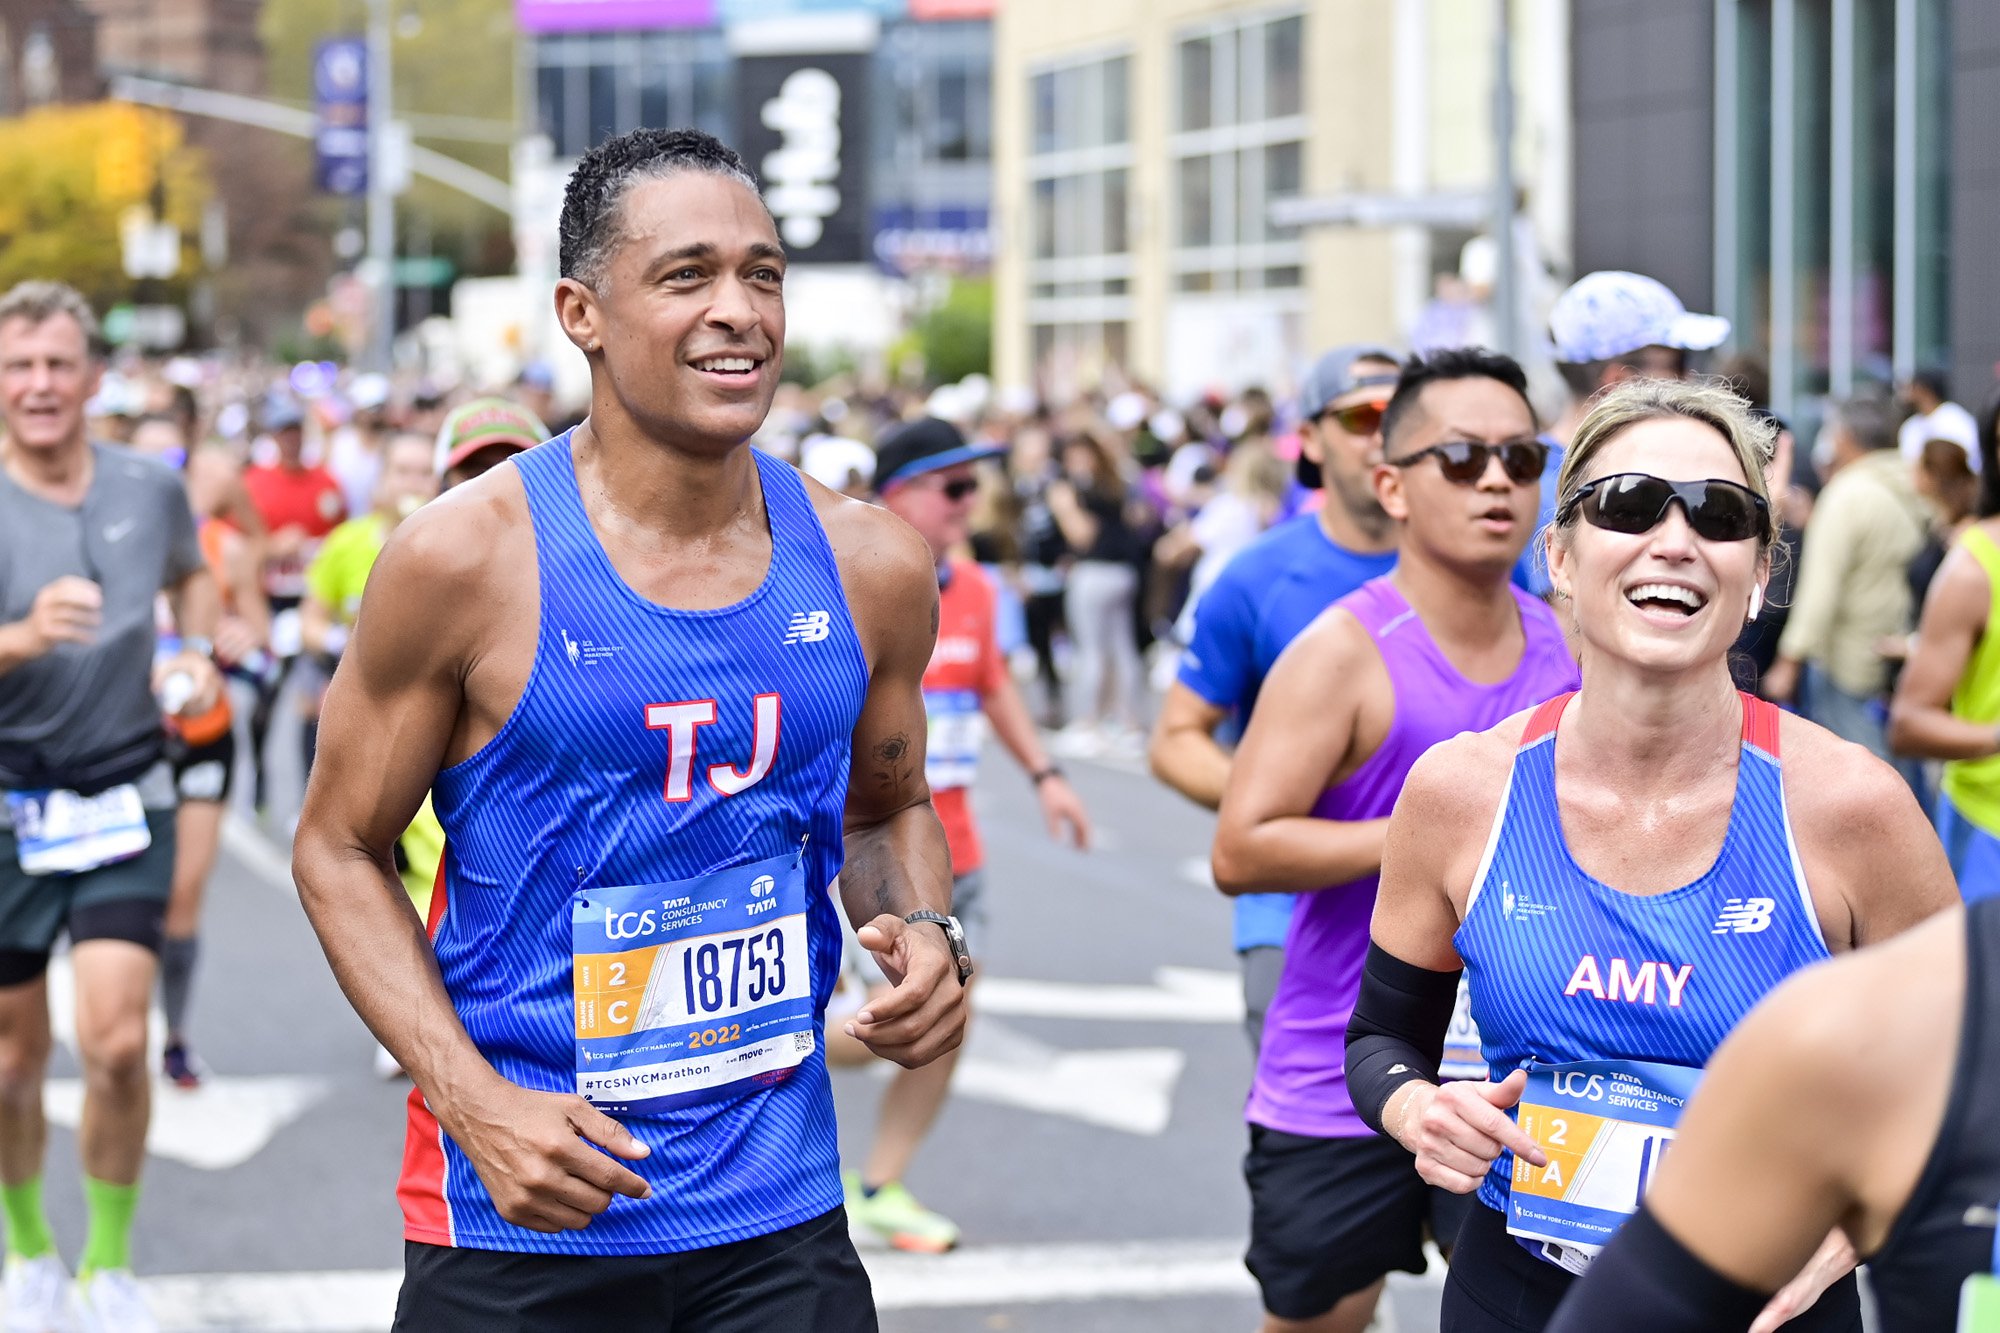 TJ Holmes and Amy Robach run during the 2022 TCS New York Road City Marathon in New York City on November 06, 2022. | Source: Getty Images